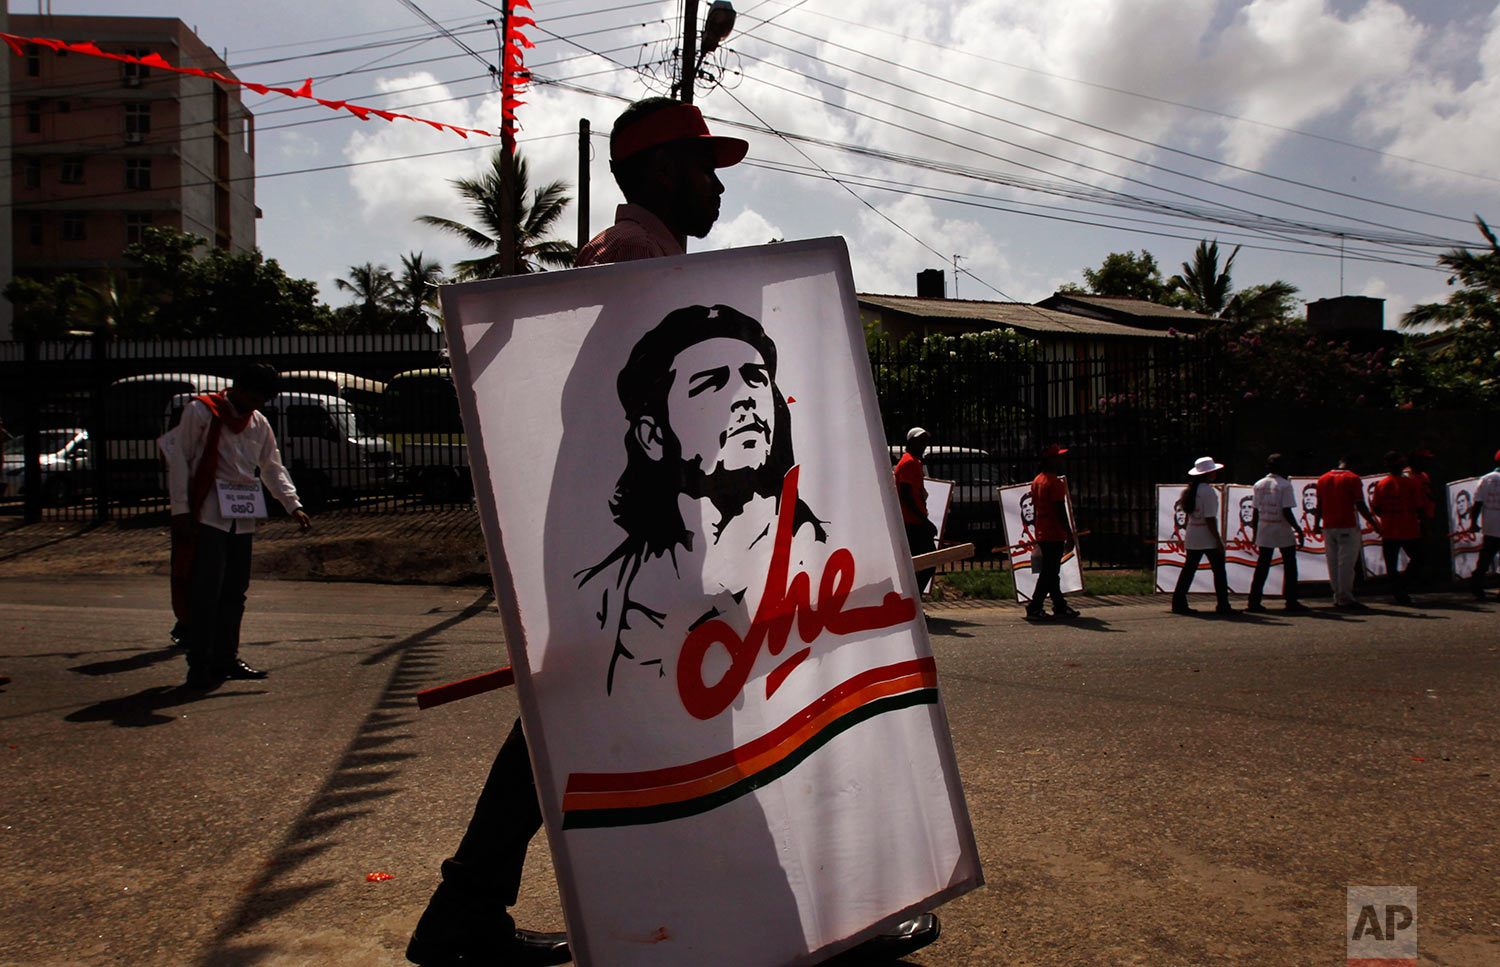  Activists of Sri Lanka's Marxist political party, People's Liberation Front carry posters of Che Guevara during a street march to celebrate international Labor Day known as May Day in Colombo, Sri Lanka, Tuesday, May 1, 2012.&nbsp; (AP Photo/Gemunu 